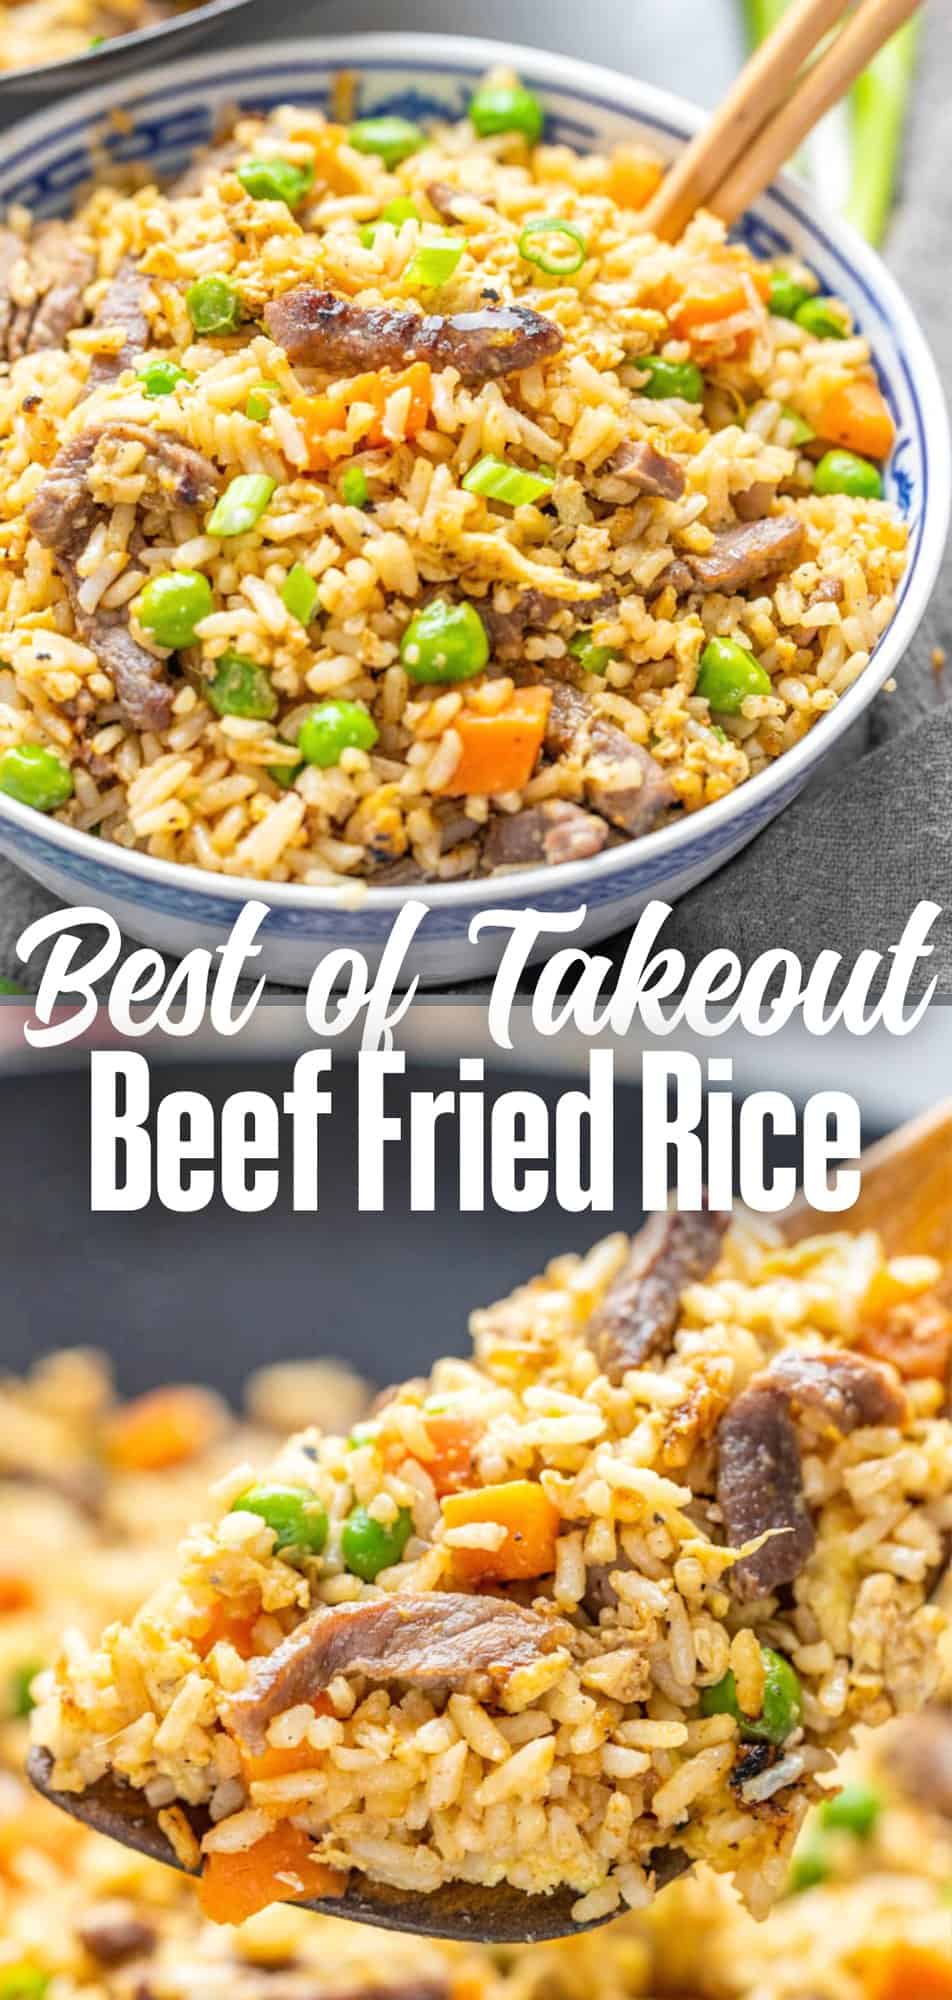 Takeout Beef Fried Rice